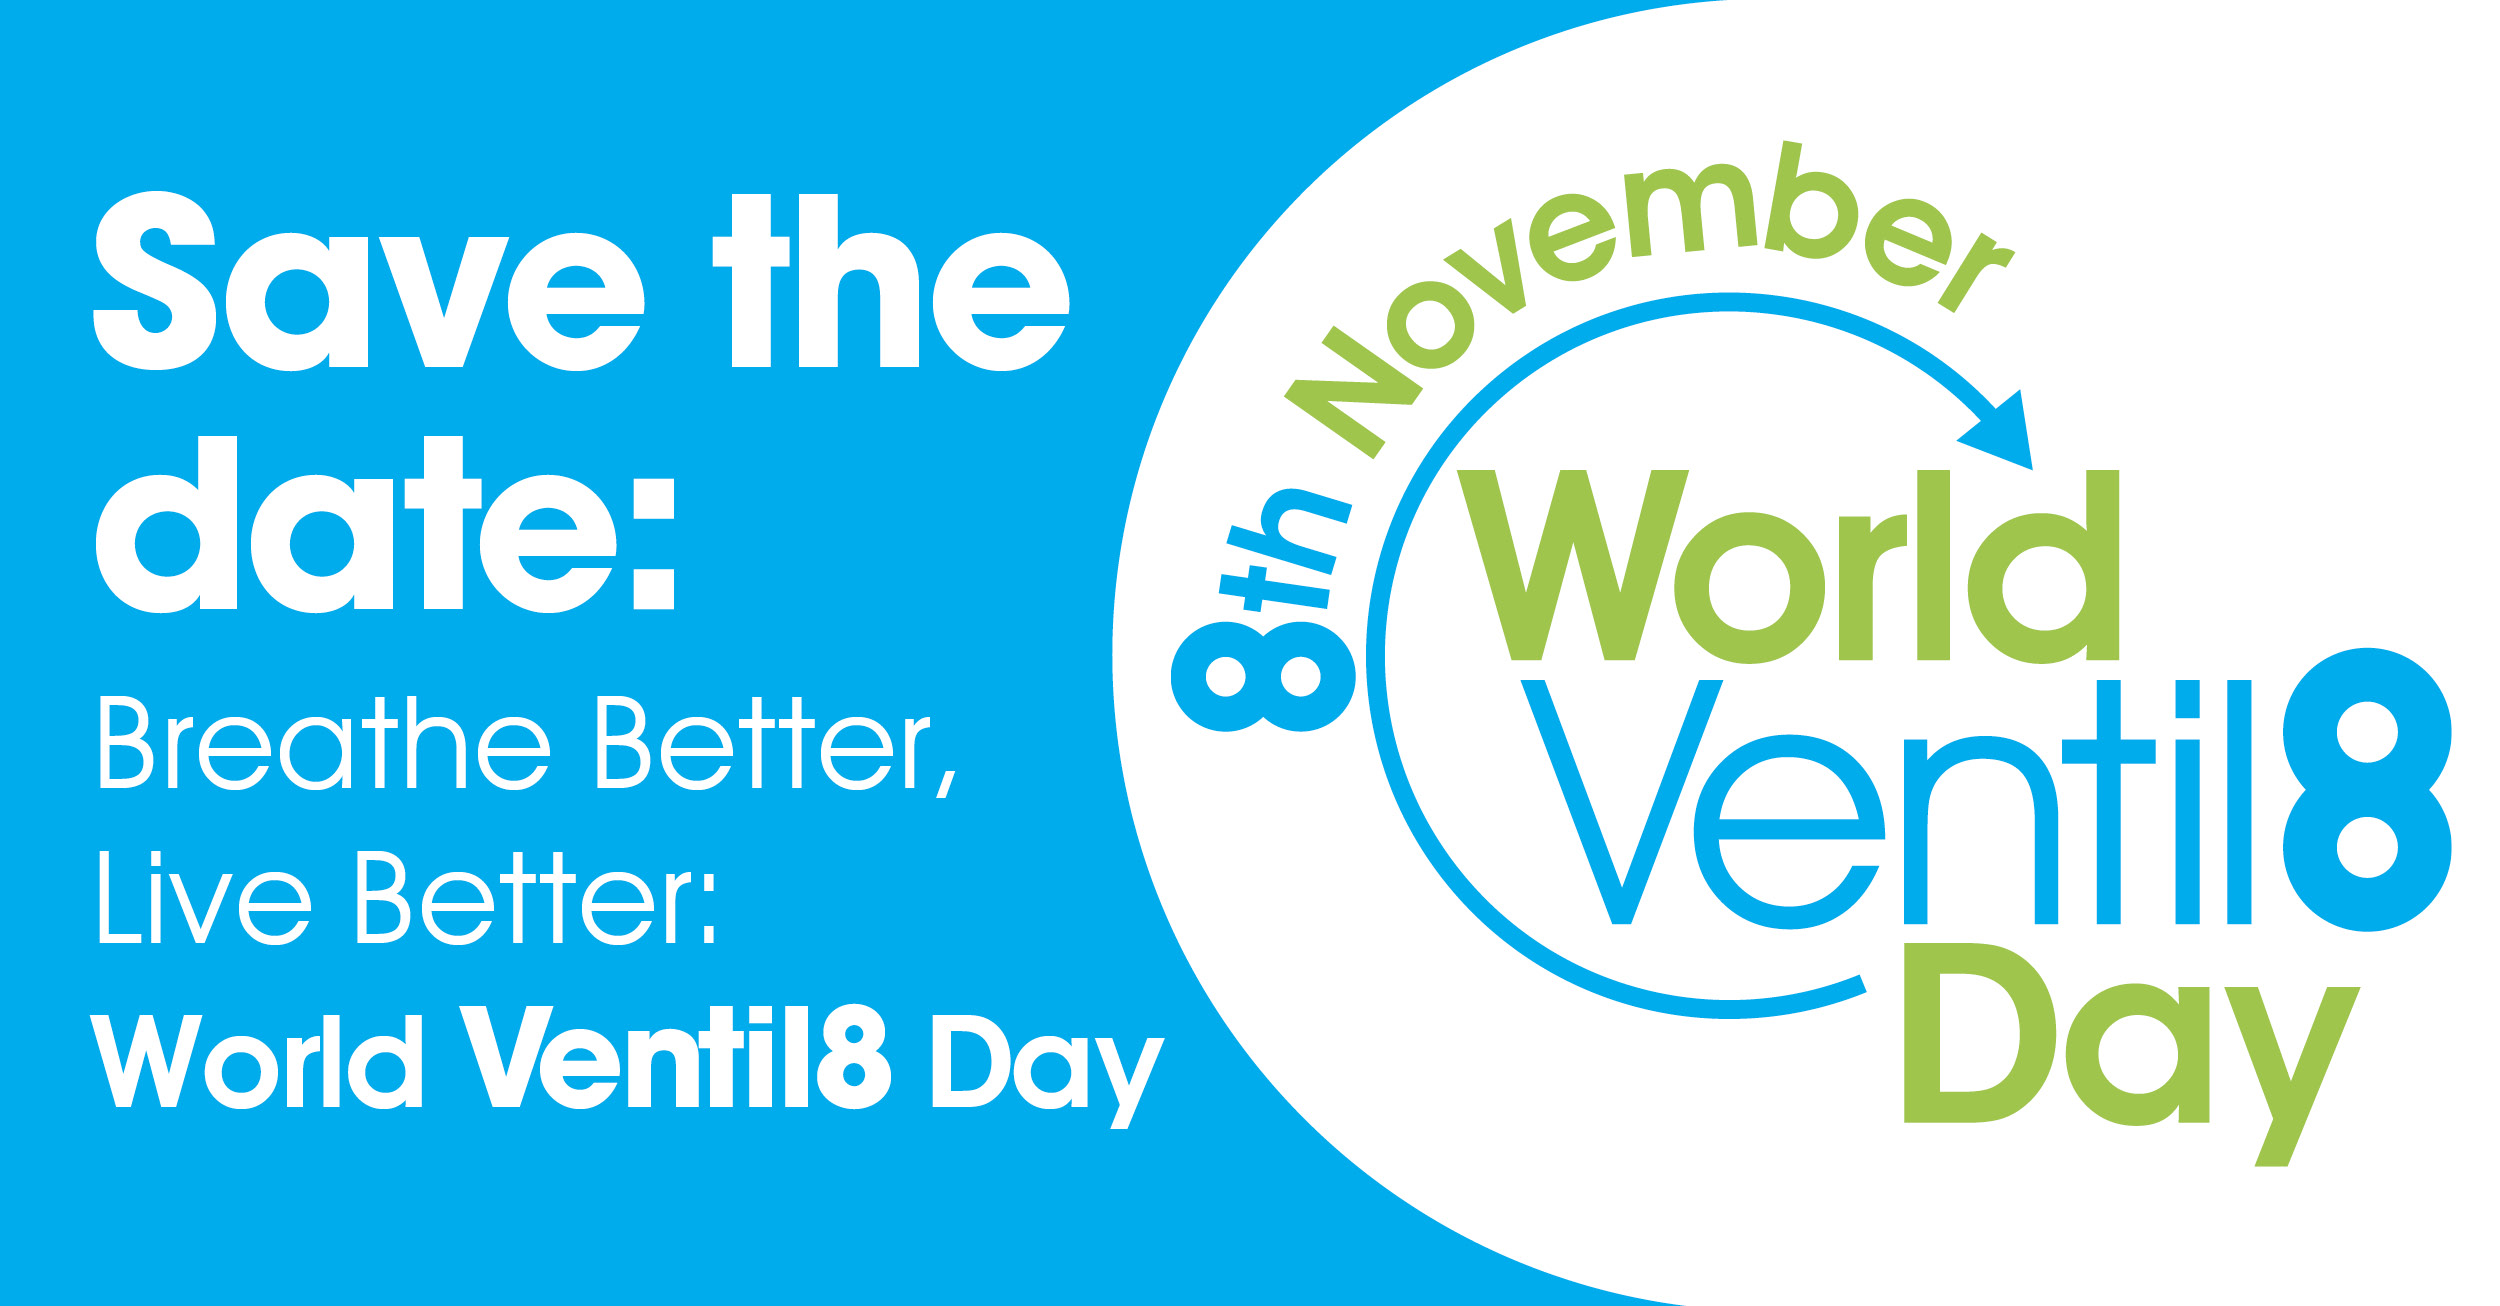 The World Ventil8 Day logo, stating "save the date: breathe better, live better"